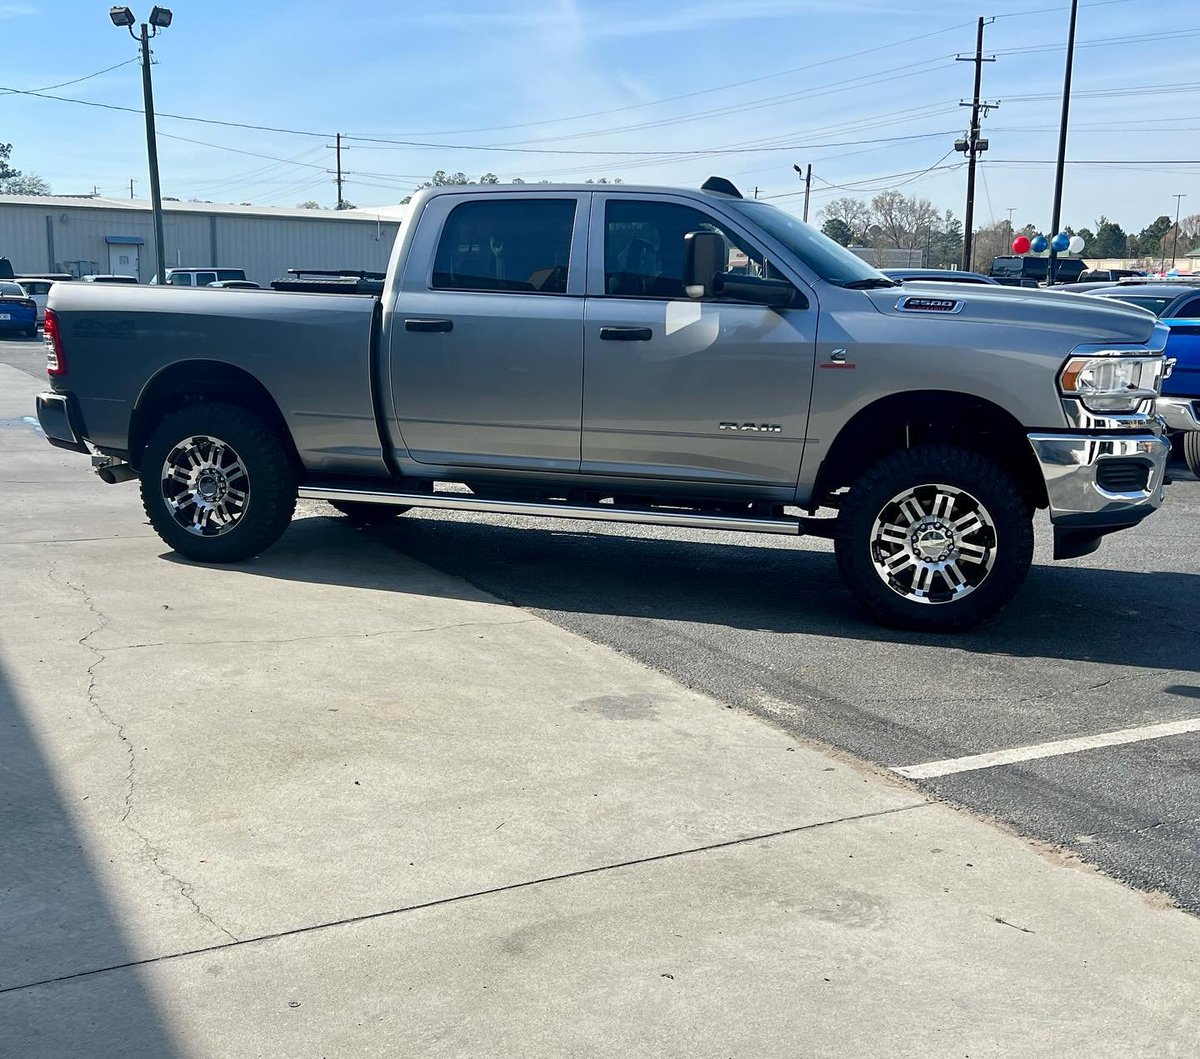 Vision Wheels! Check out our customer Todd from Georgia with his @ramtrucks on a set of @visionwheel. These are the Vision style 375 Warrior in the size 20x9 offset +18 bolt pattern 8x165. 

Note 📷 these will need a set of 14x1.5mm conical seat lug nuts.